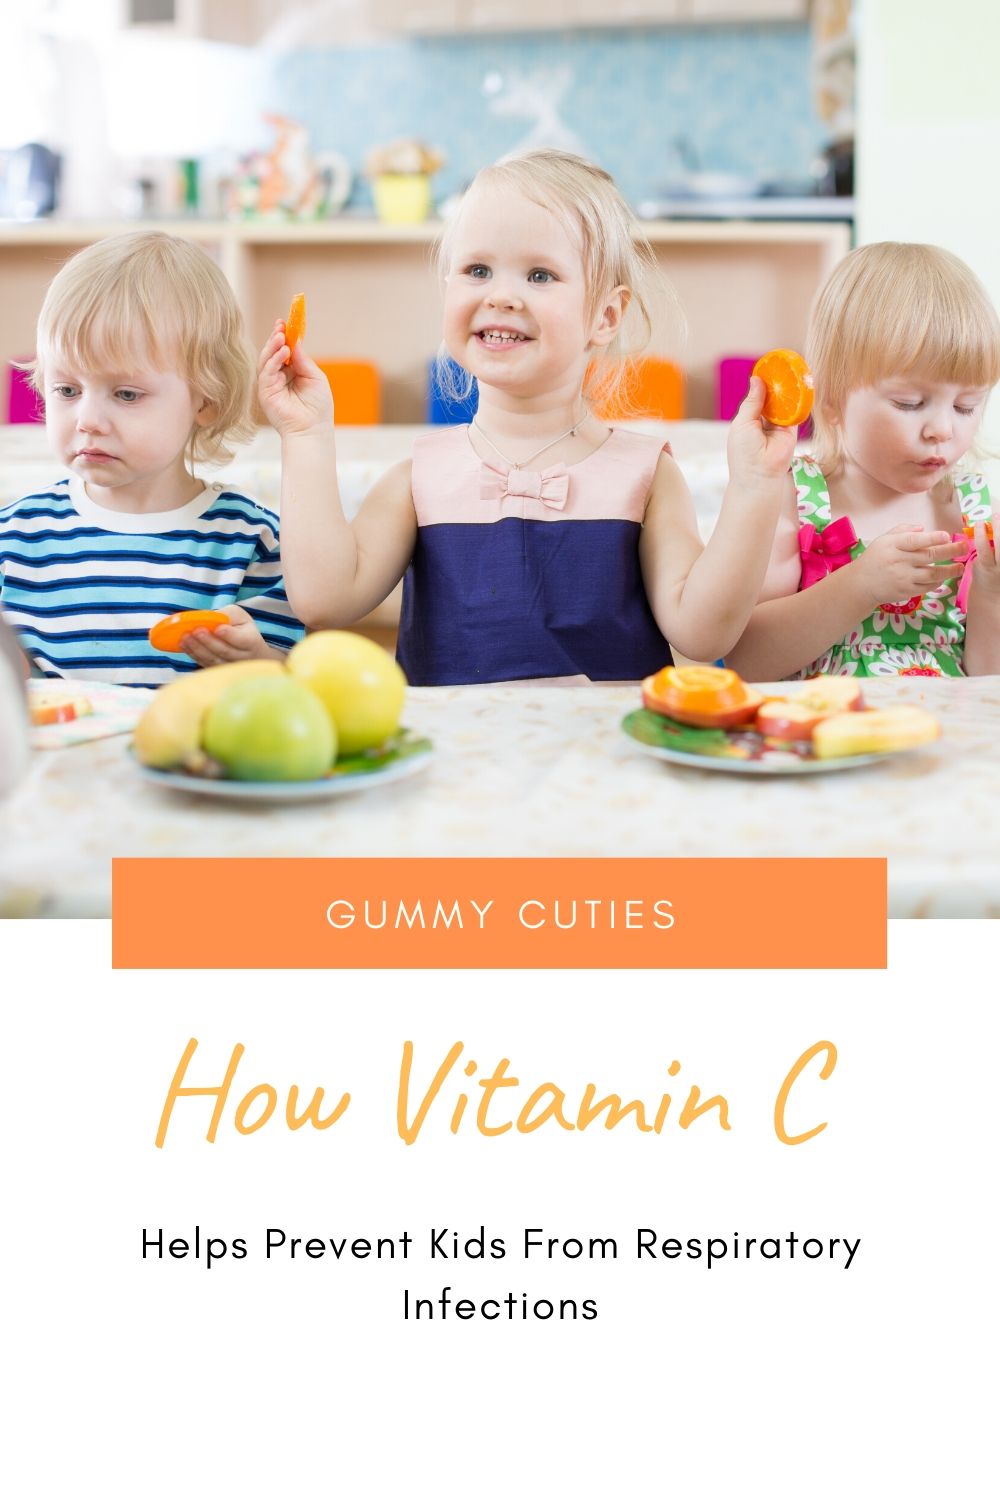 How Vitamin C Helps Prevent Kids From Respiratory Infections